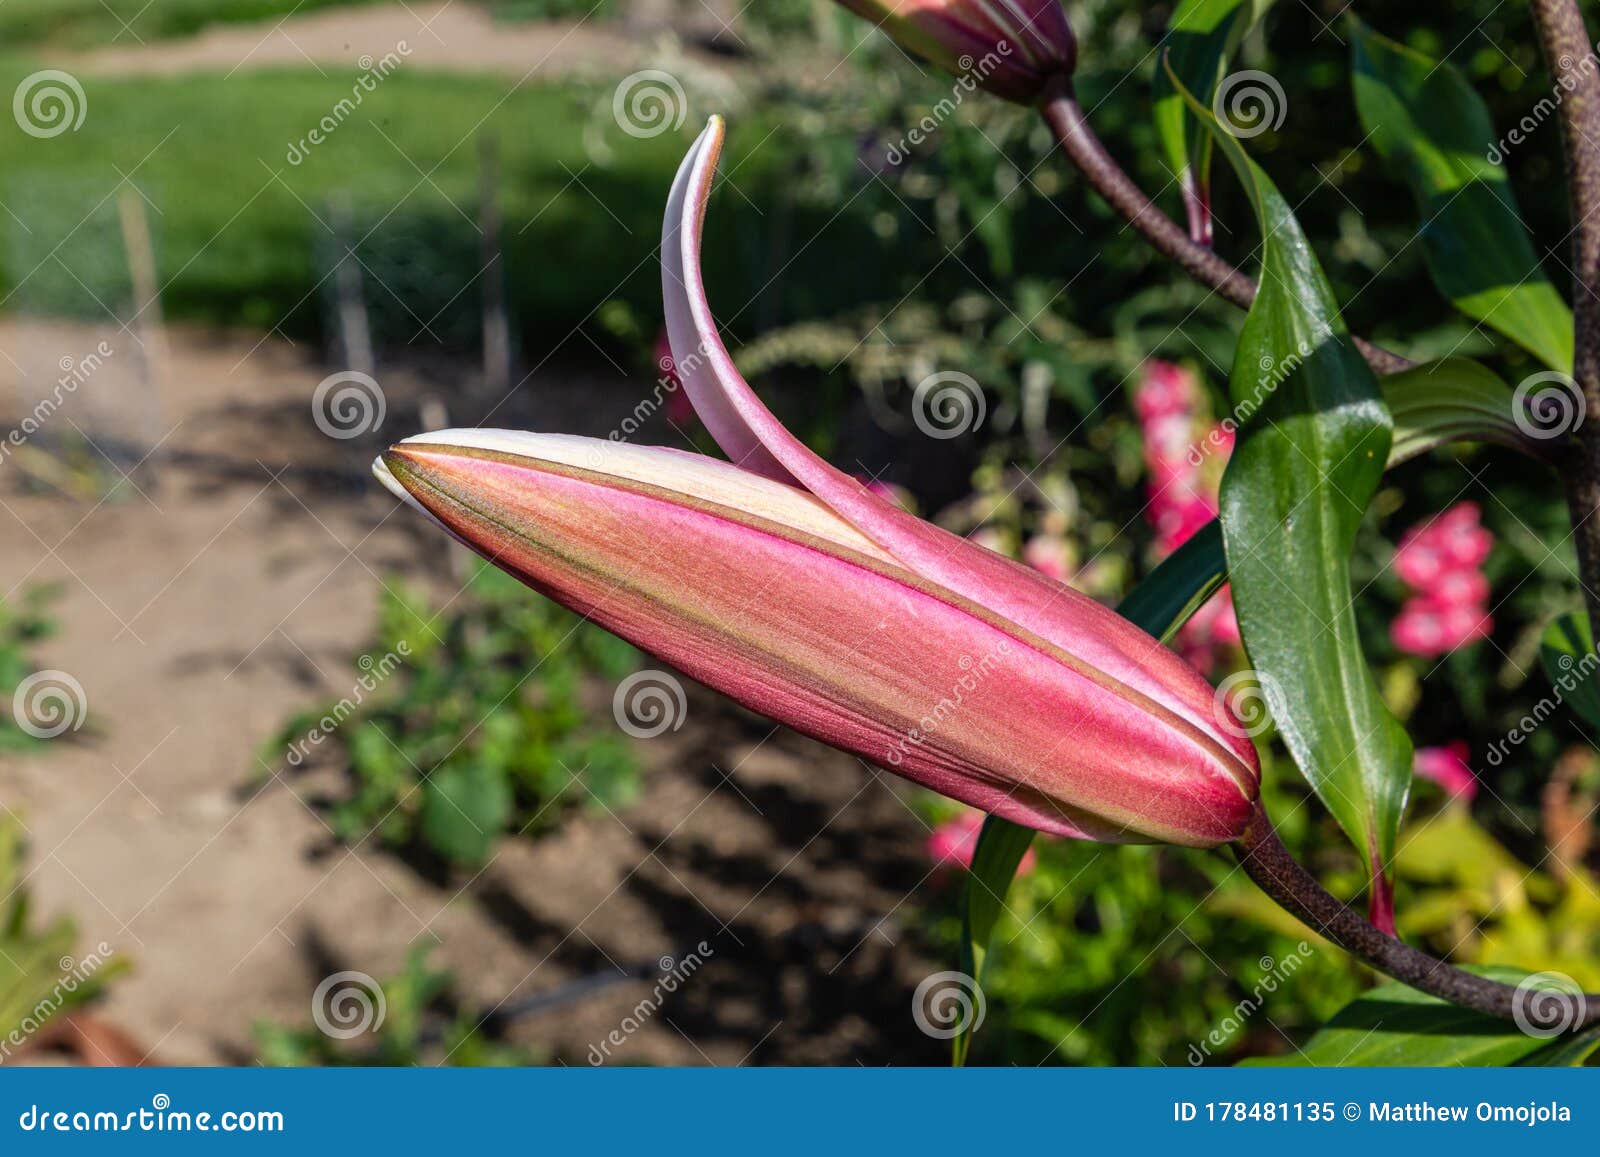 Flowers and Flora from Wanaka New Zealand; Bloom of Lily, Pink Flower ...